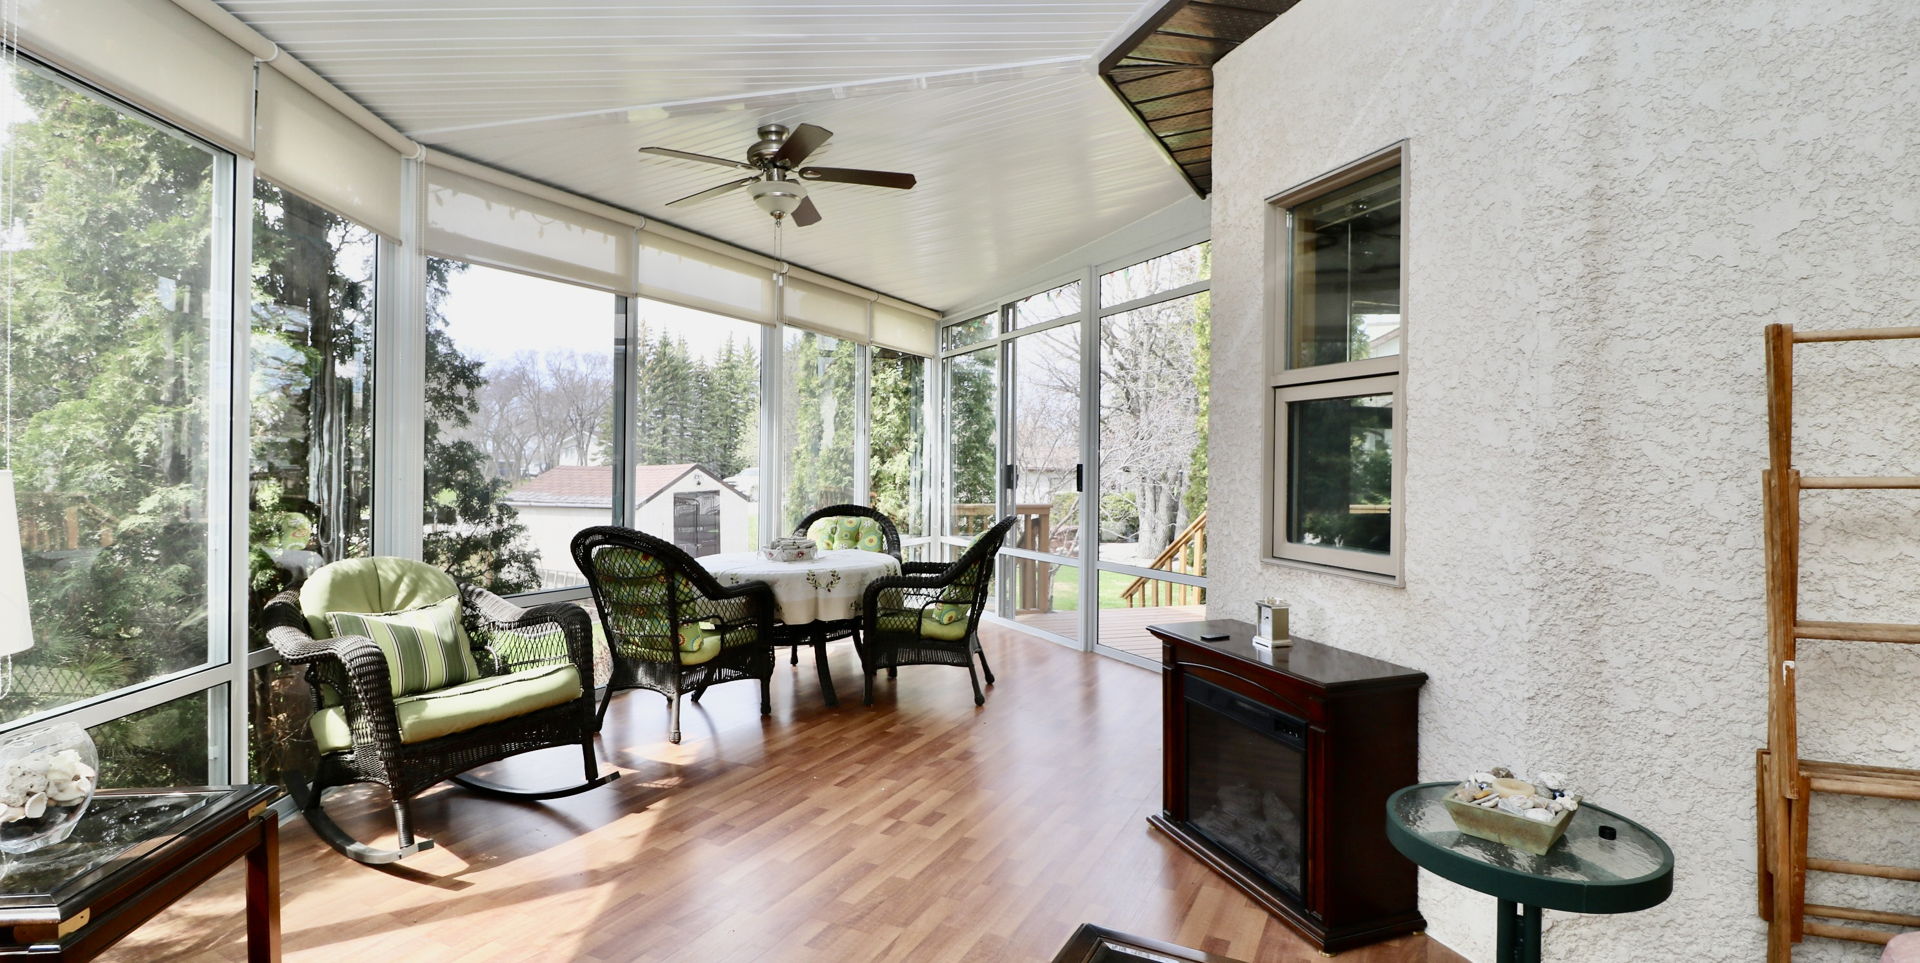 sunroom / solarium with wood-type flooring and a ceiling fan